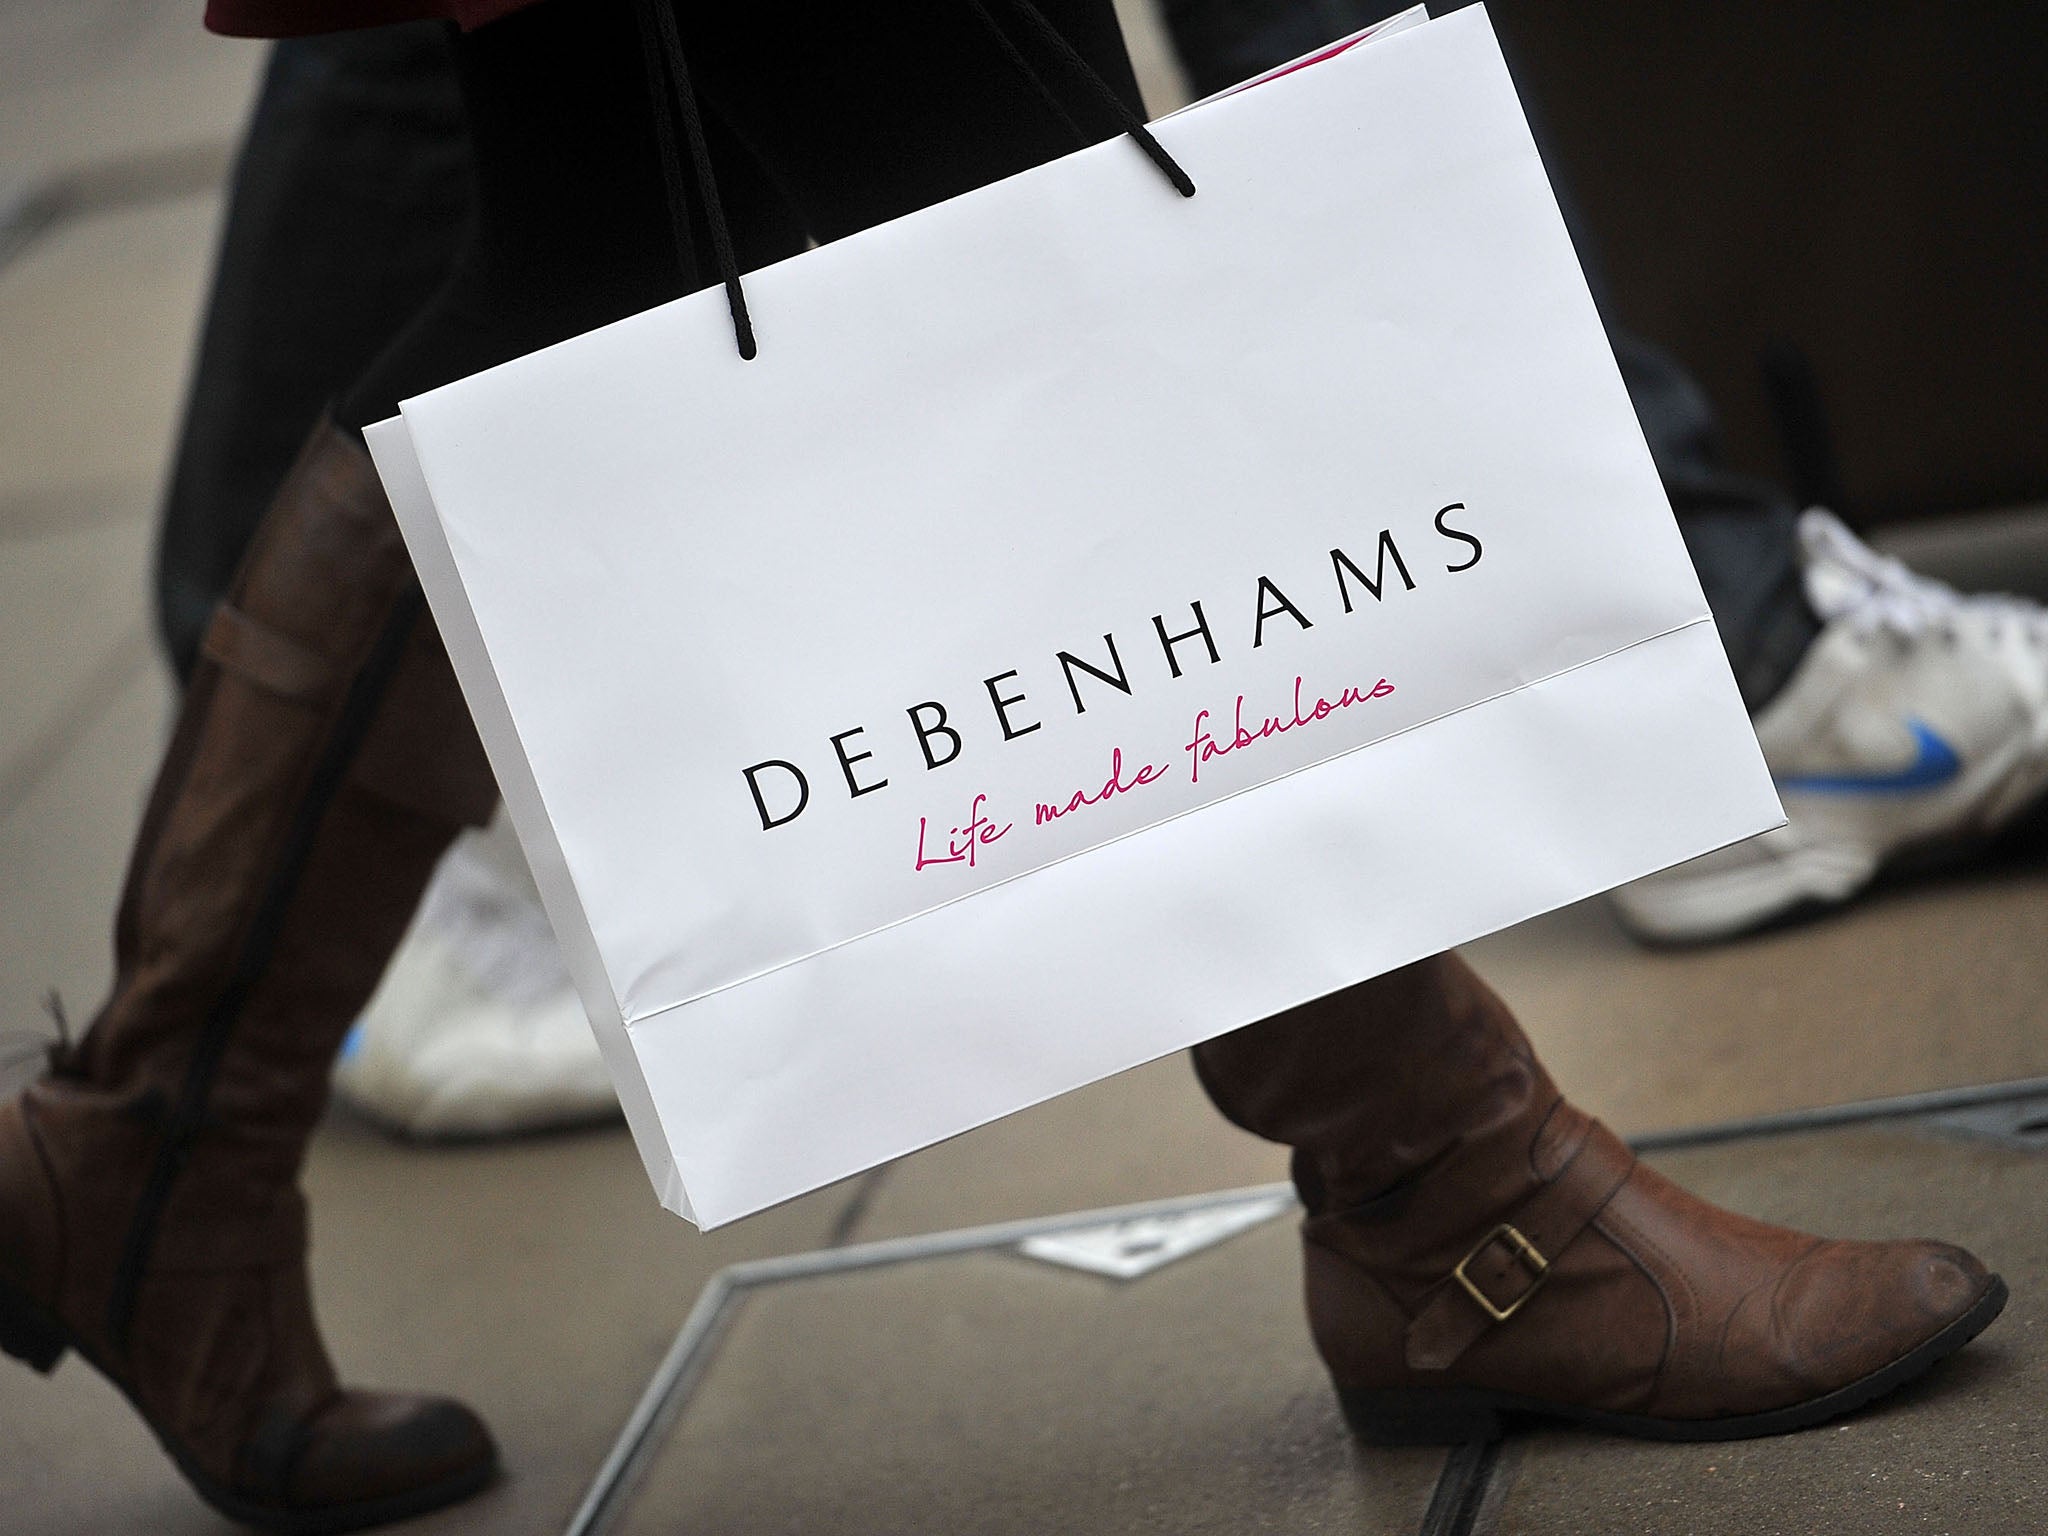 ​Debenhams saw its share price slump as much as 24 per cent in January after warning over profits and slashing prices